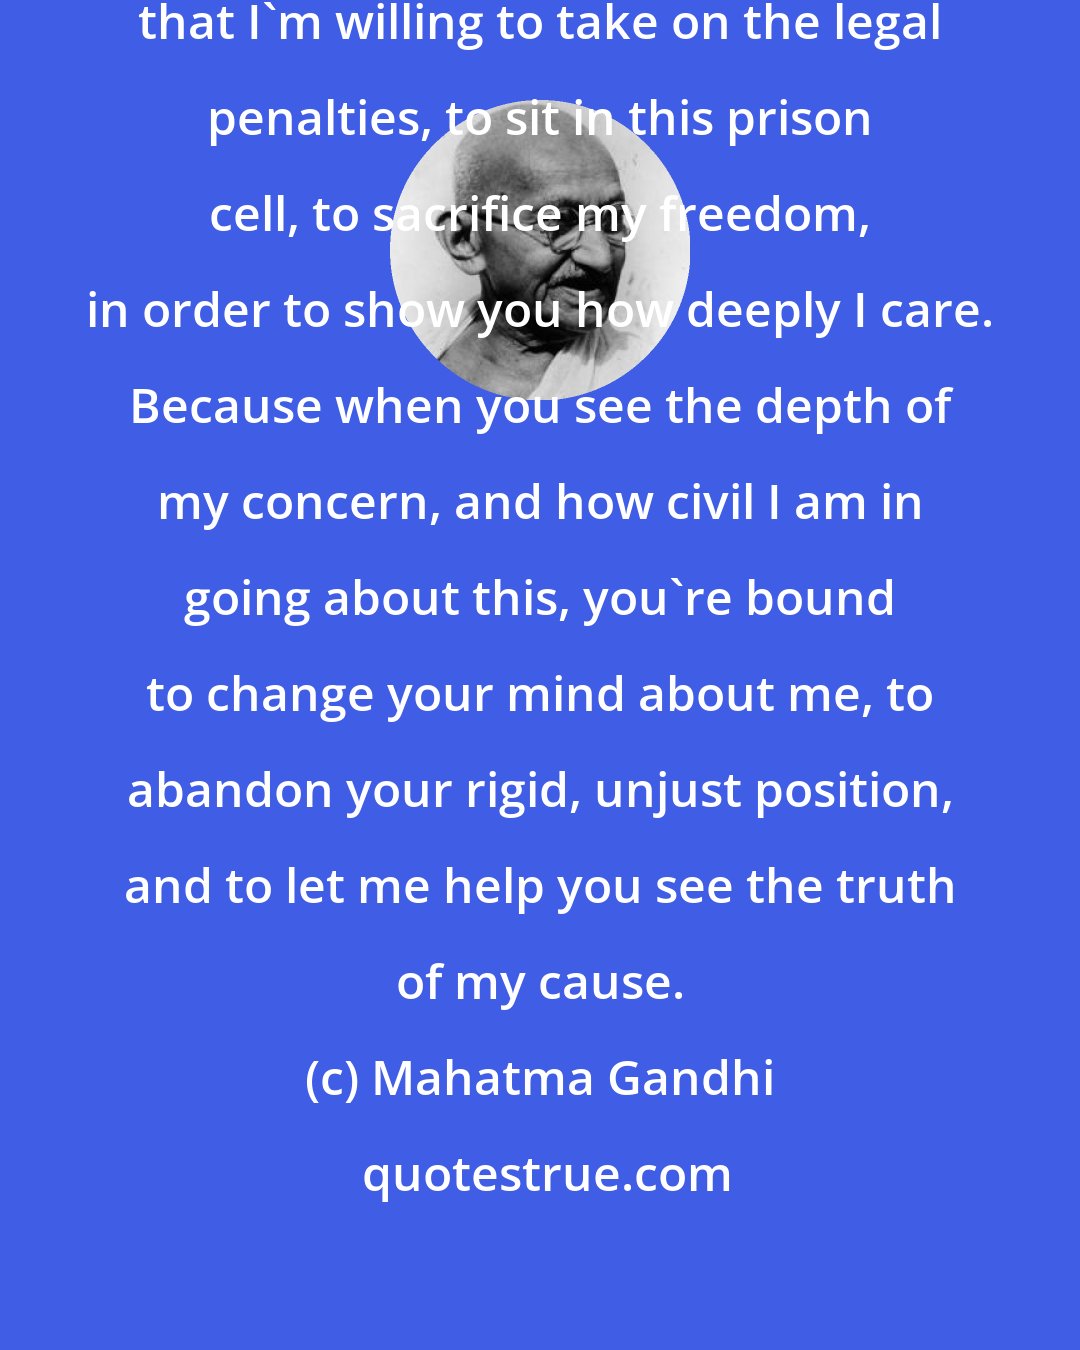 Mahatma Gandhi: I care so deeply about this matter that I'm willing to take on the legal penalties, to sit in this prison cell, to sacrifice my freedom, in order to show you how deeply I care. Because when you see the depth of my concern, and how civil I am in going about this, you're bound to change your mind about me, to abandon your rigid, unjust position, and to let me help you see the truth of my cause.